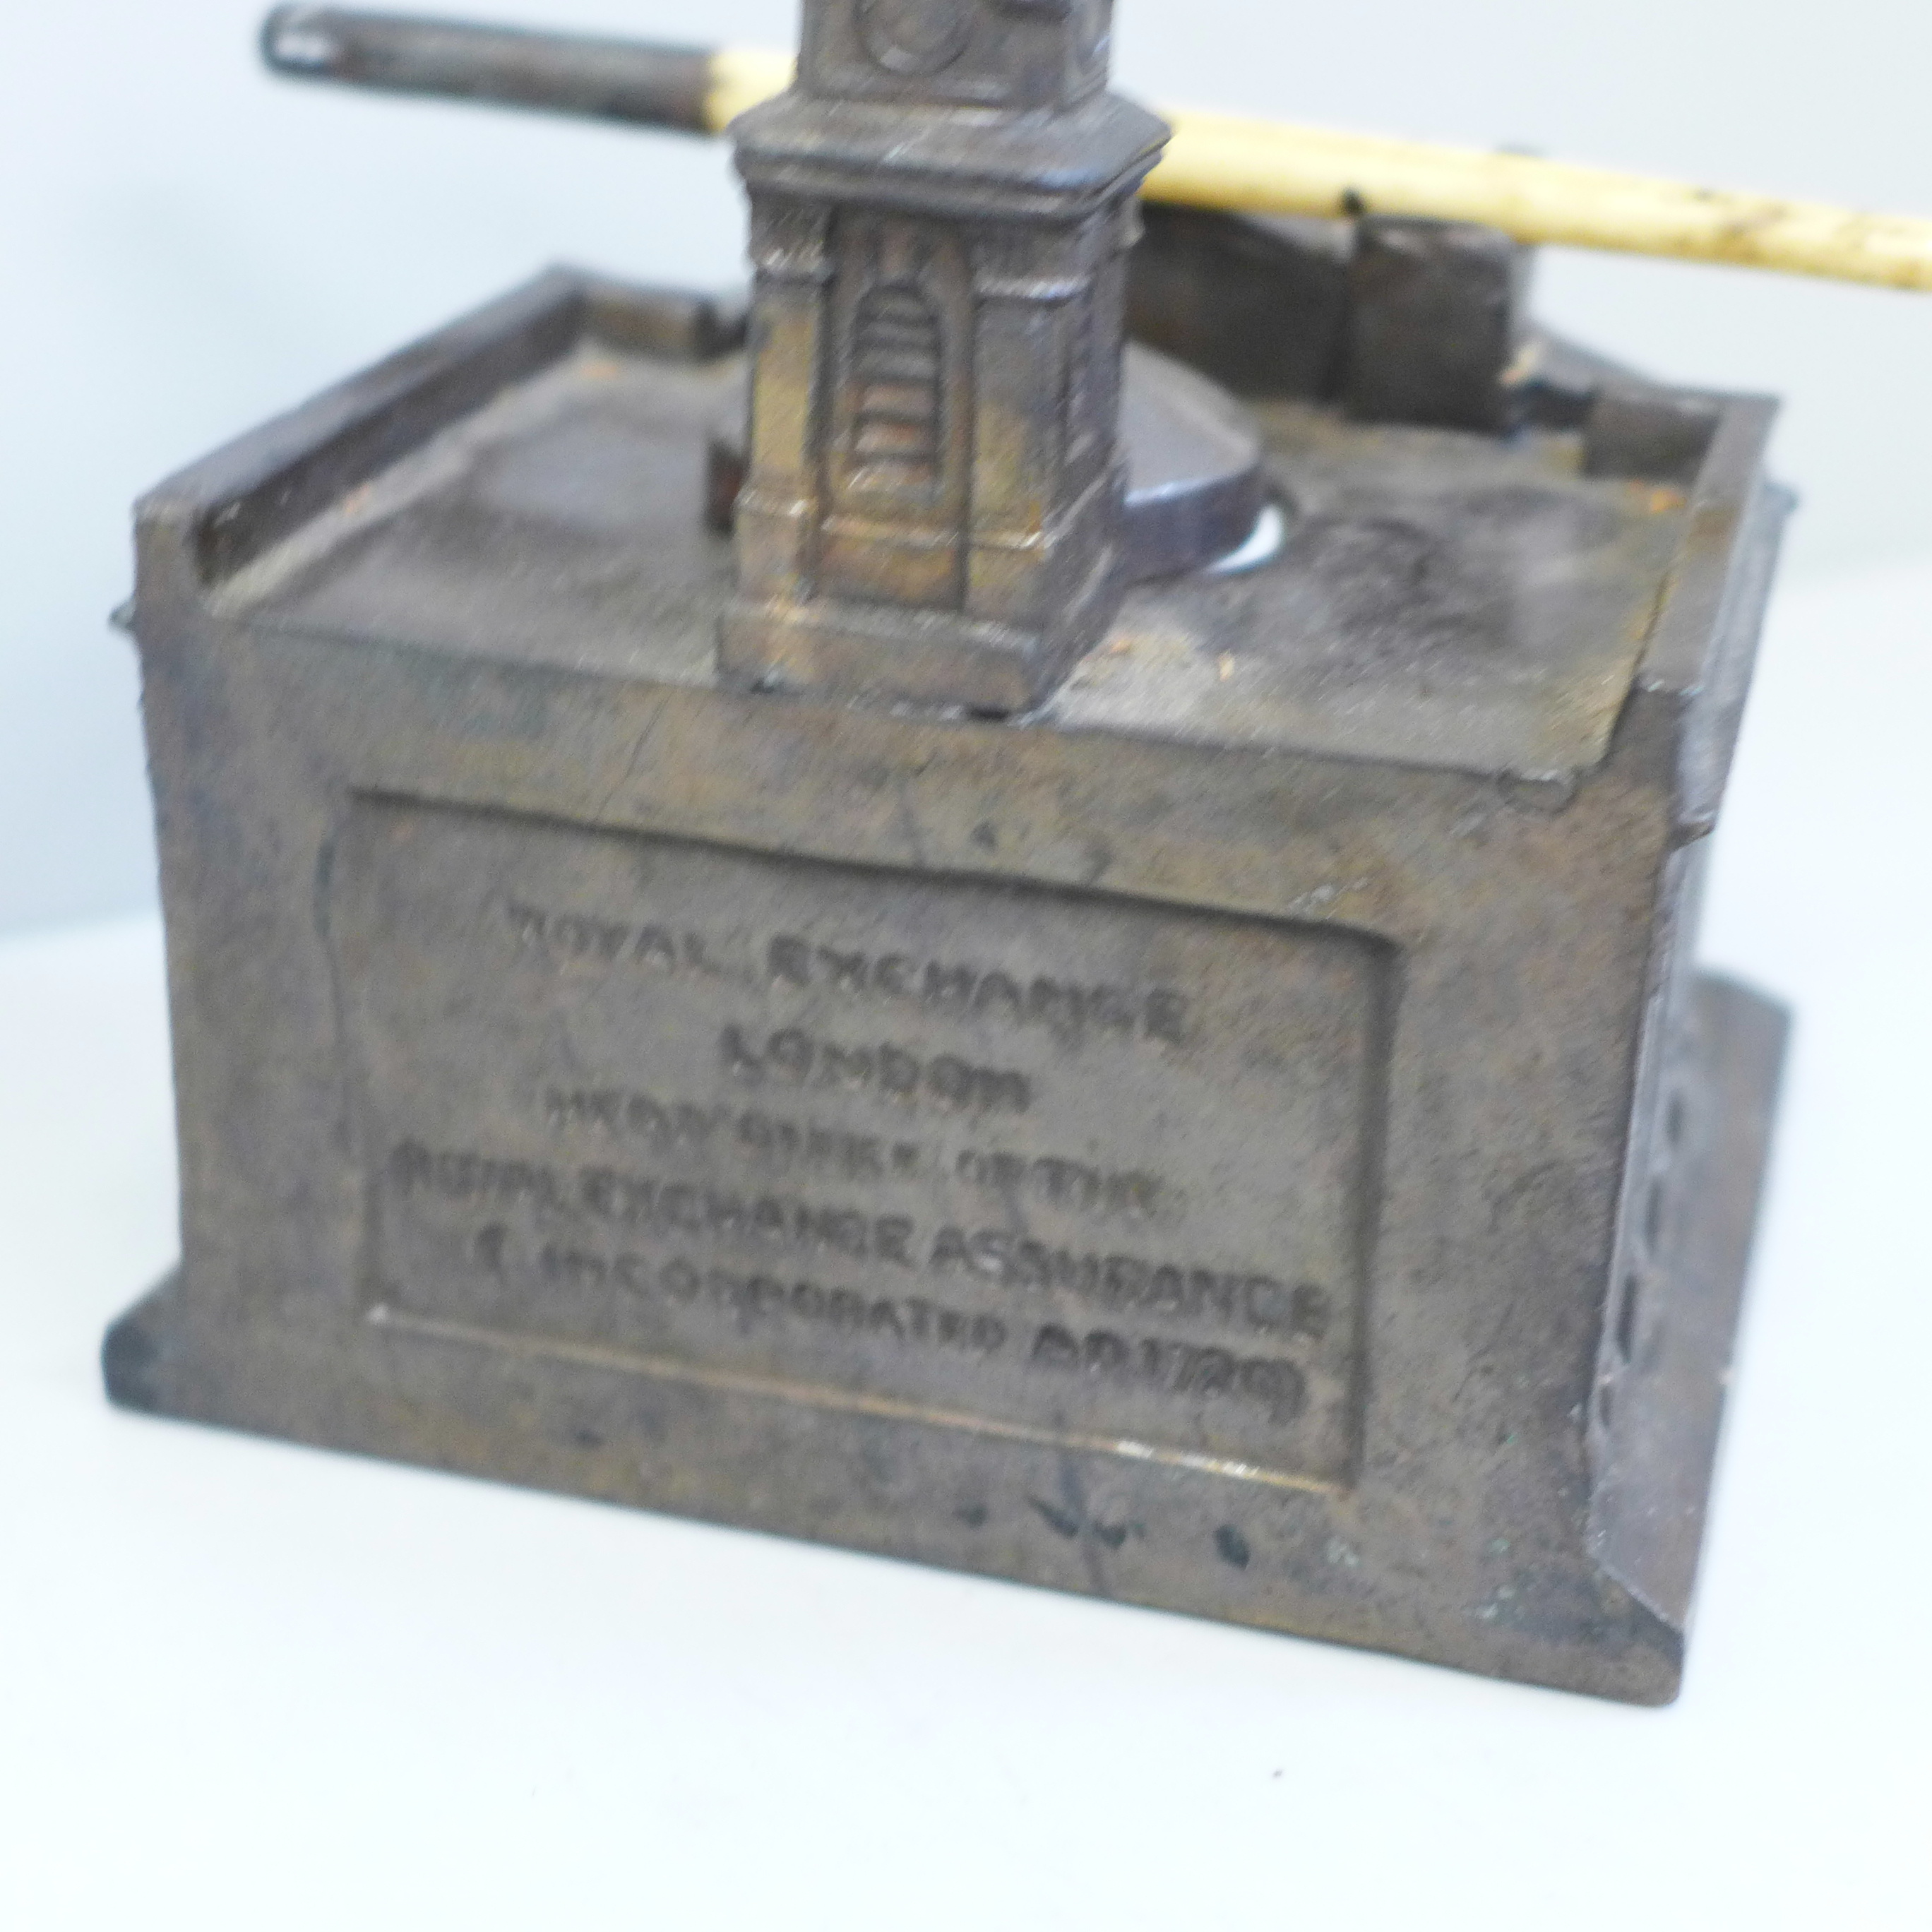 A Royal Exchange Assurance cast metal novelty inkwell - Image 4 of 4